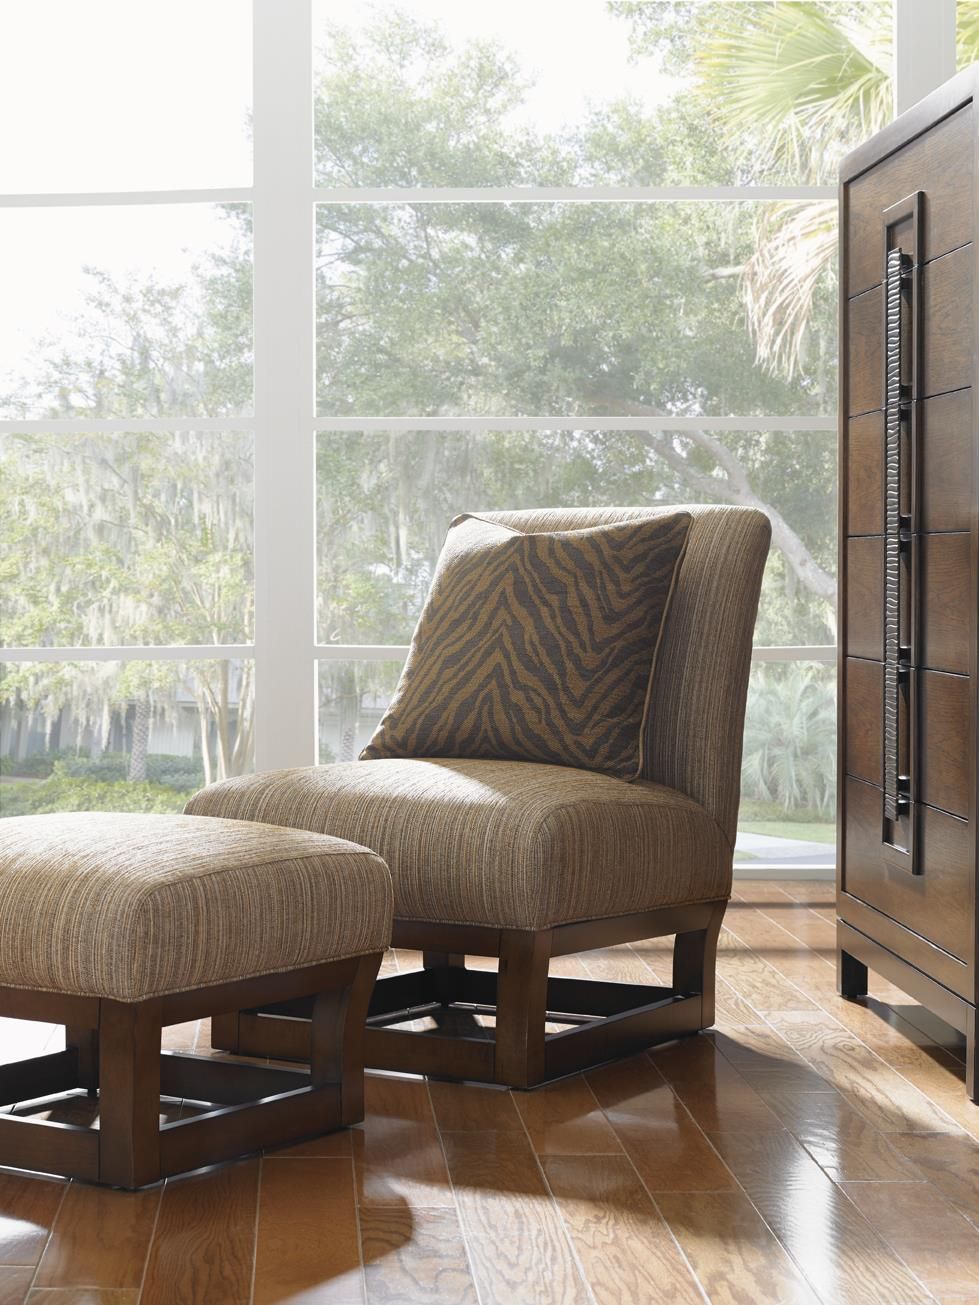 Tommy Bahama Home Ocean Club Contemporary Exposed Wood Fusion Chair In Gray And Brown Stripes Cylinder Pouf Ottomans (View 13 of 20)